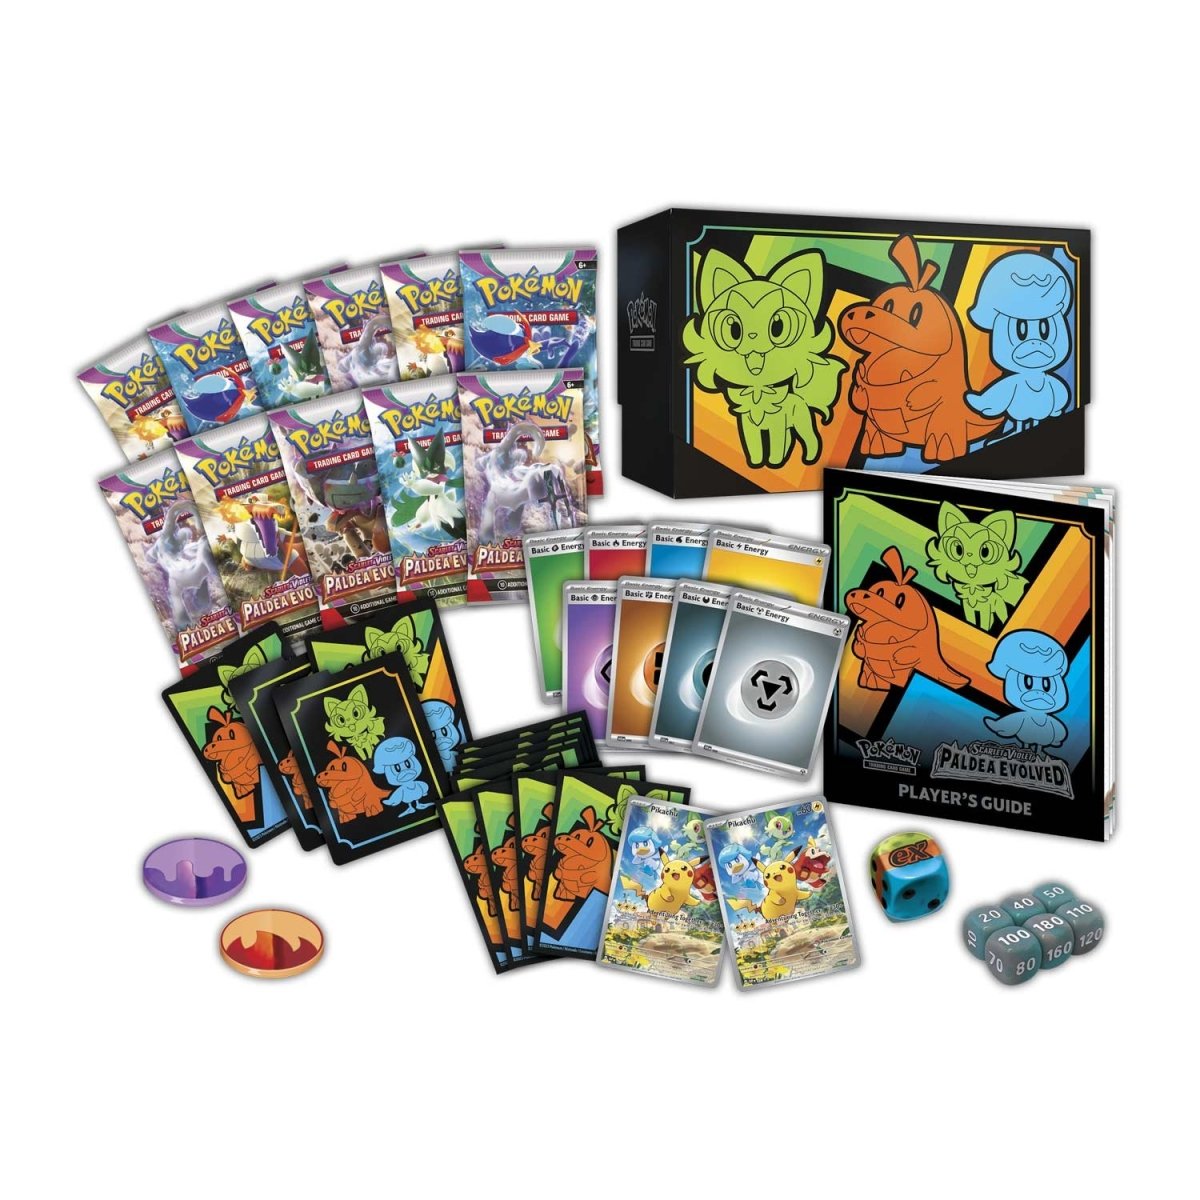 View of all the contents contained within the Pokemon Scarlet and Violet Paldea Evolved Elite Trainer Box including booster packs, card sleeves, Pikachu promo card plus more.